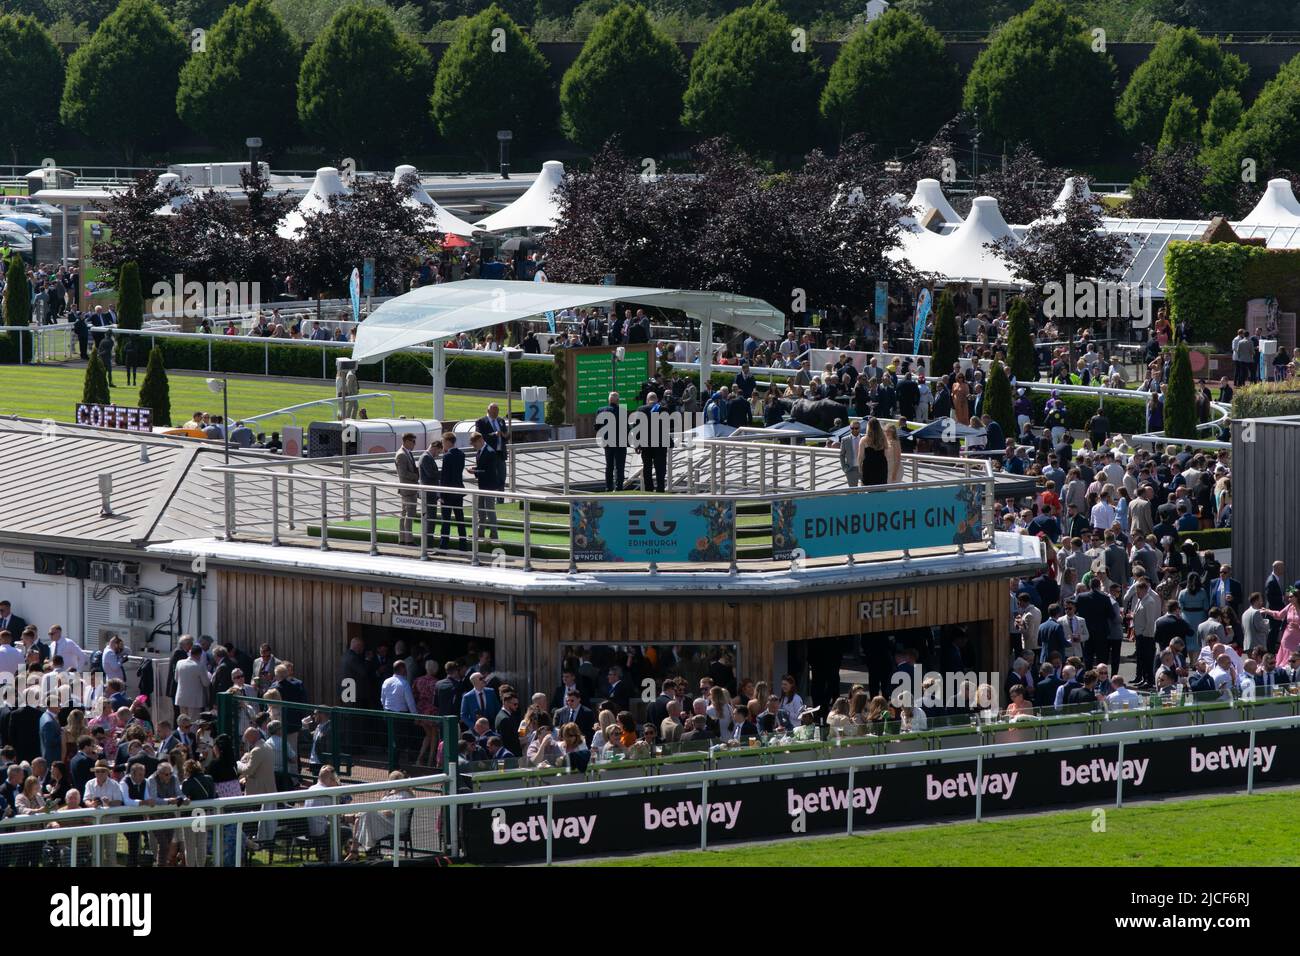 Chester racecourse. Race viewing stand at Edinburgh Gin Summer Saturday with Betway sign Stock Photo